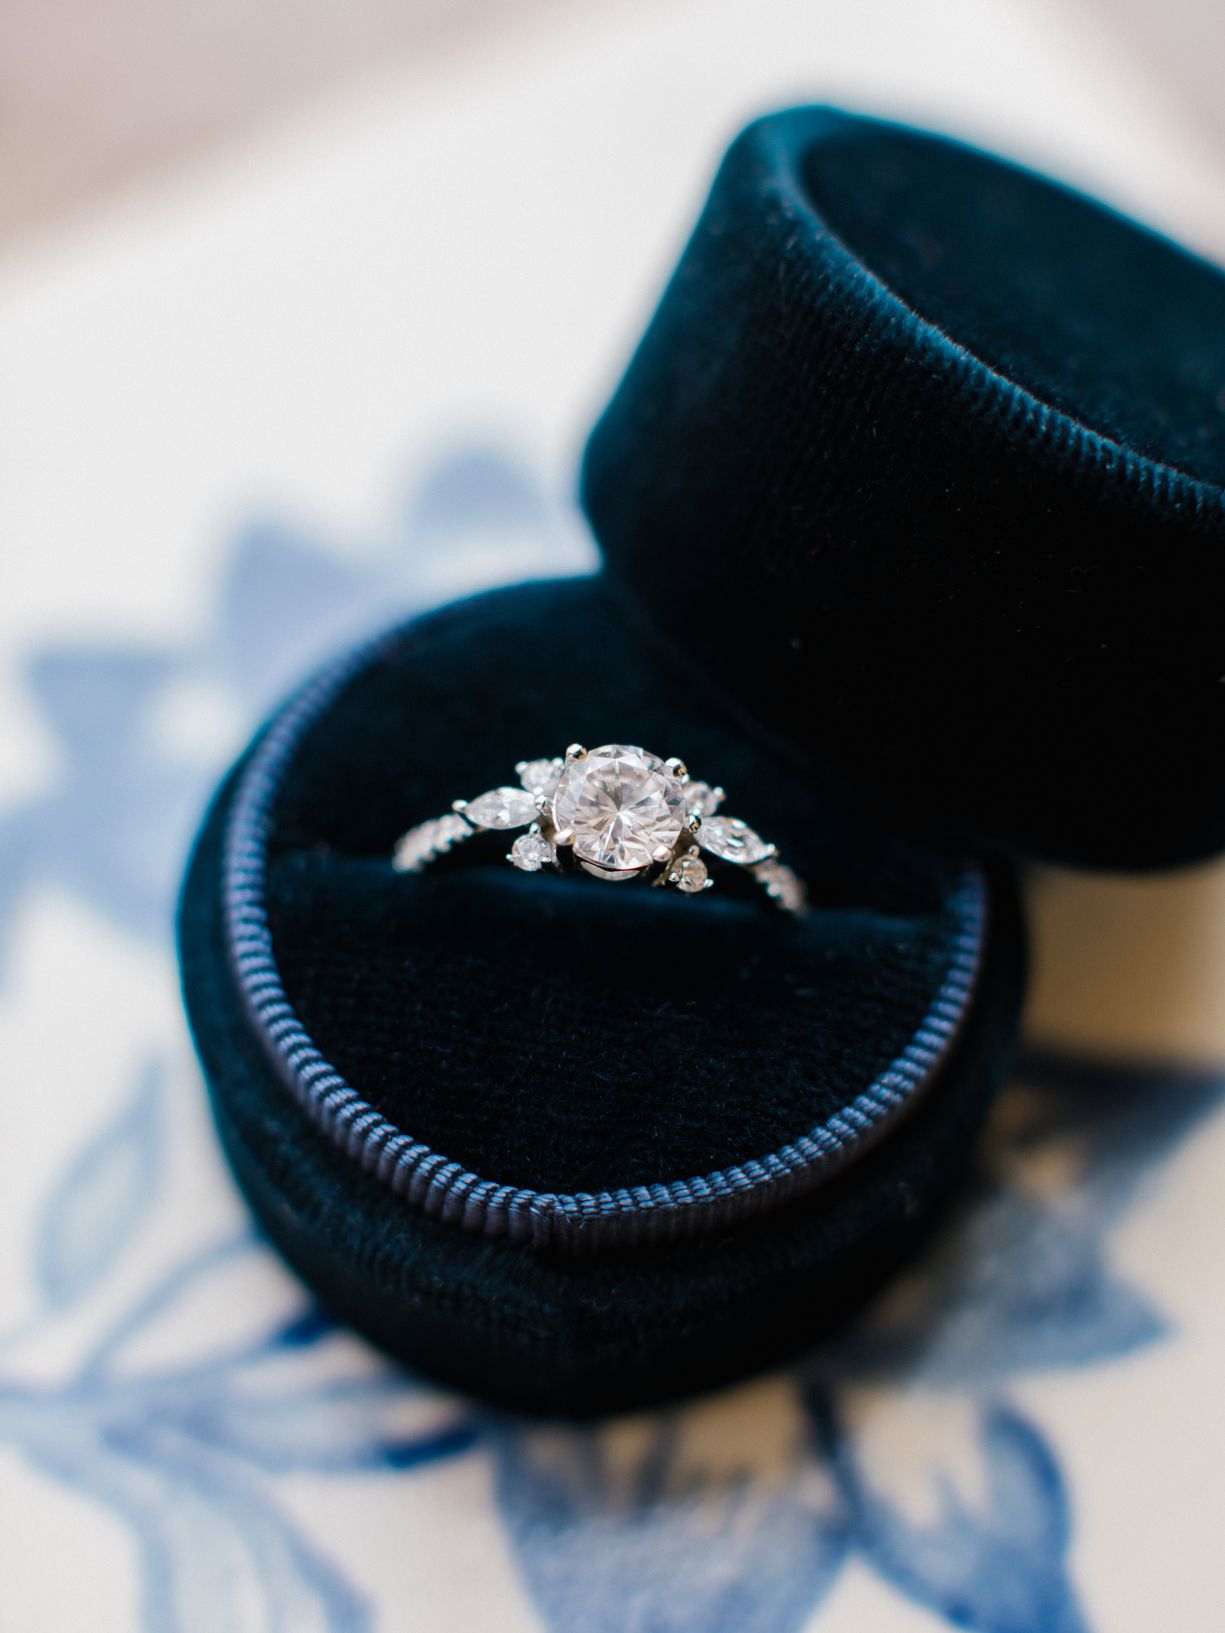 Shine Bright Together with Perfect Diamond Engagement Rings